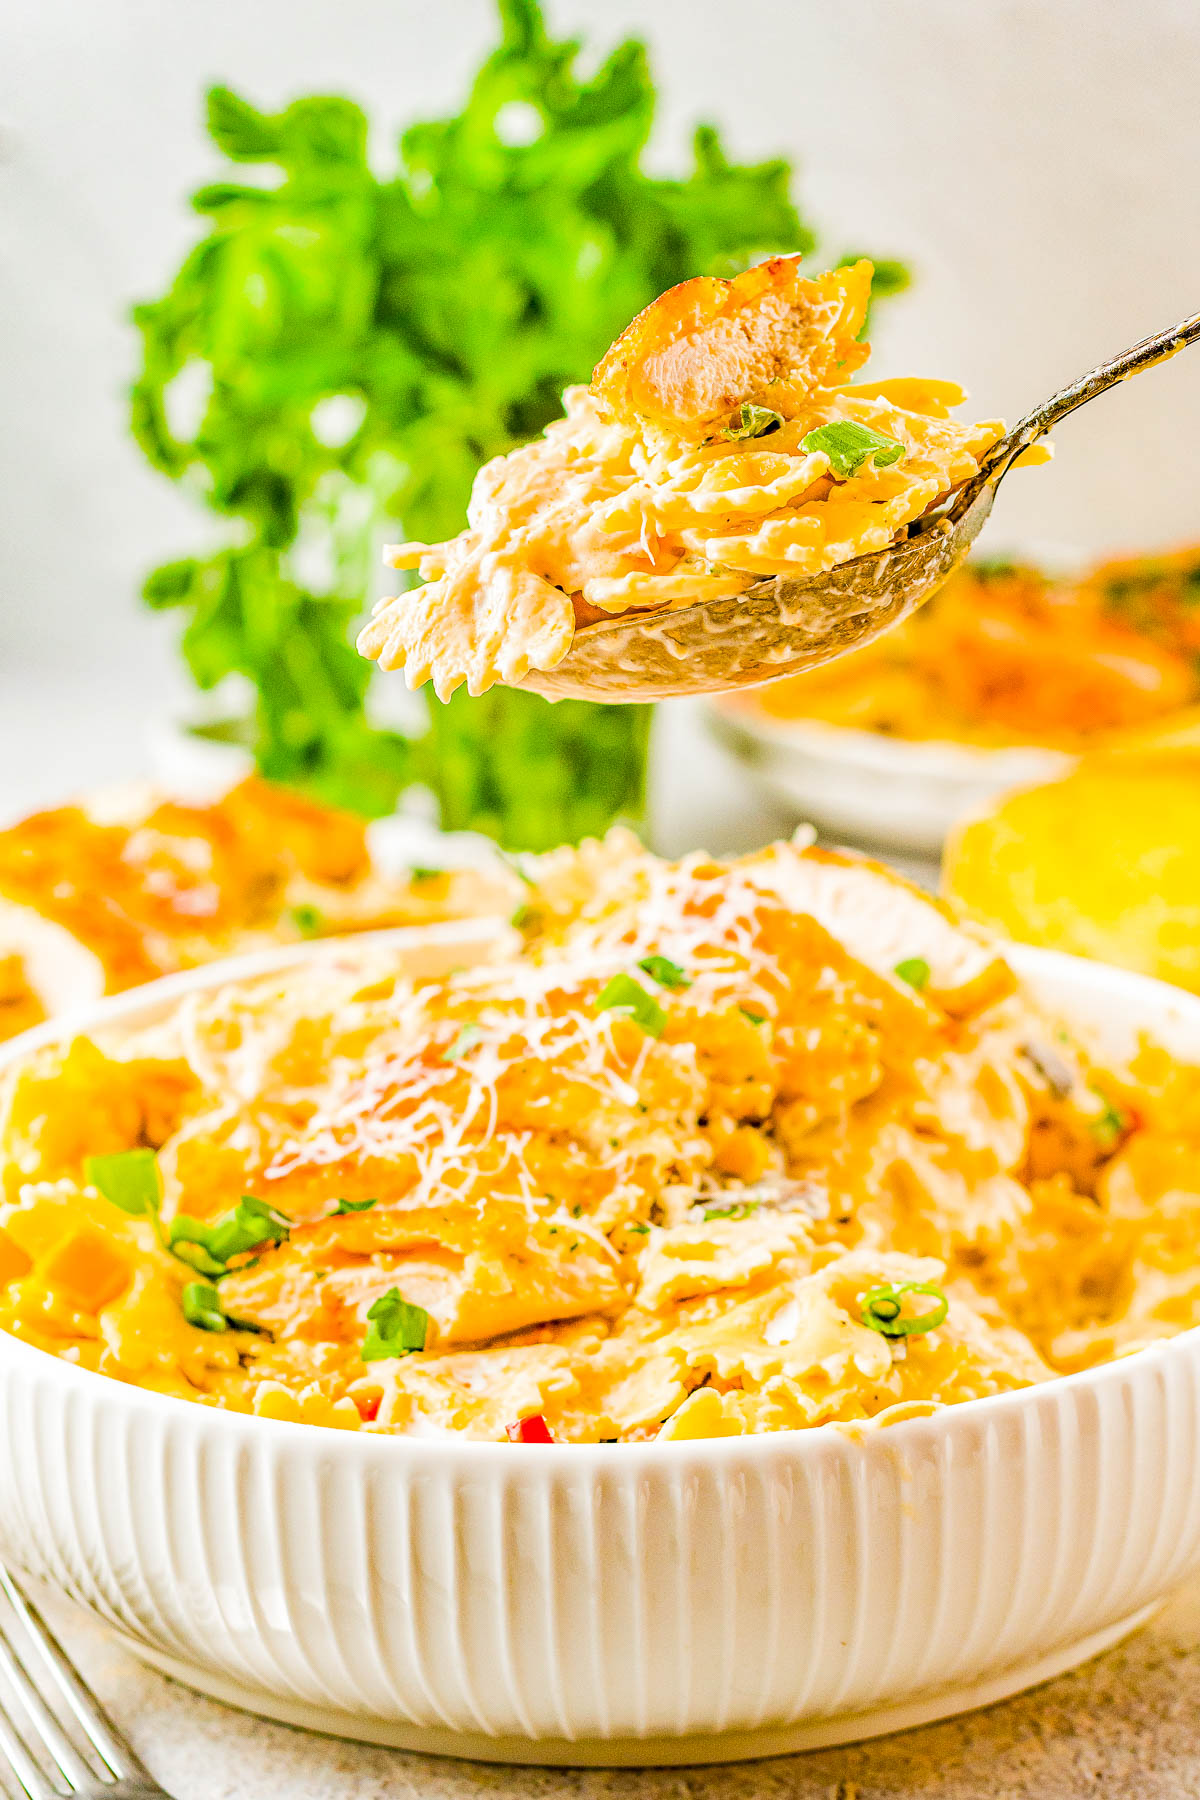 Creamy Cajun Chicken Pasta - Juicy Parmesan-crusted chicken and tender pasta with vegetables are tossed together in a creamy Cajun sauce making this recipe a family FAVORITE! My homemade version is a Chili's Restaurant copycat but I assure you, this is a better-than-the-restaurant dish you'll want to put on rotation even on busy weeknights!